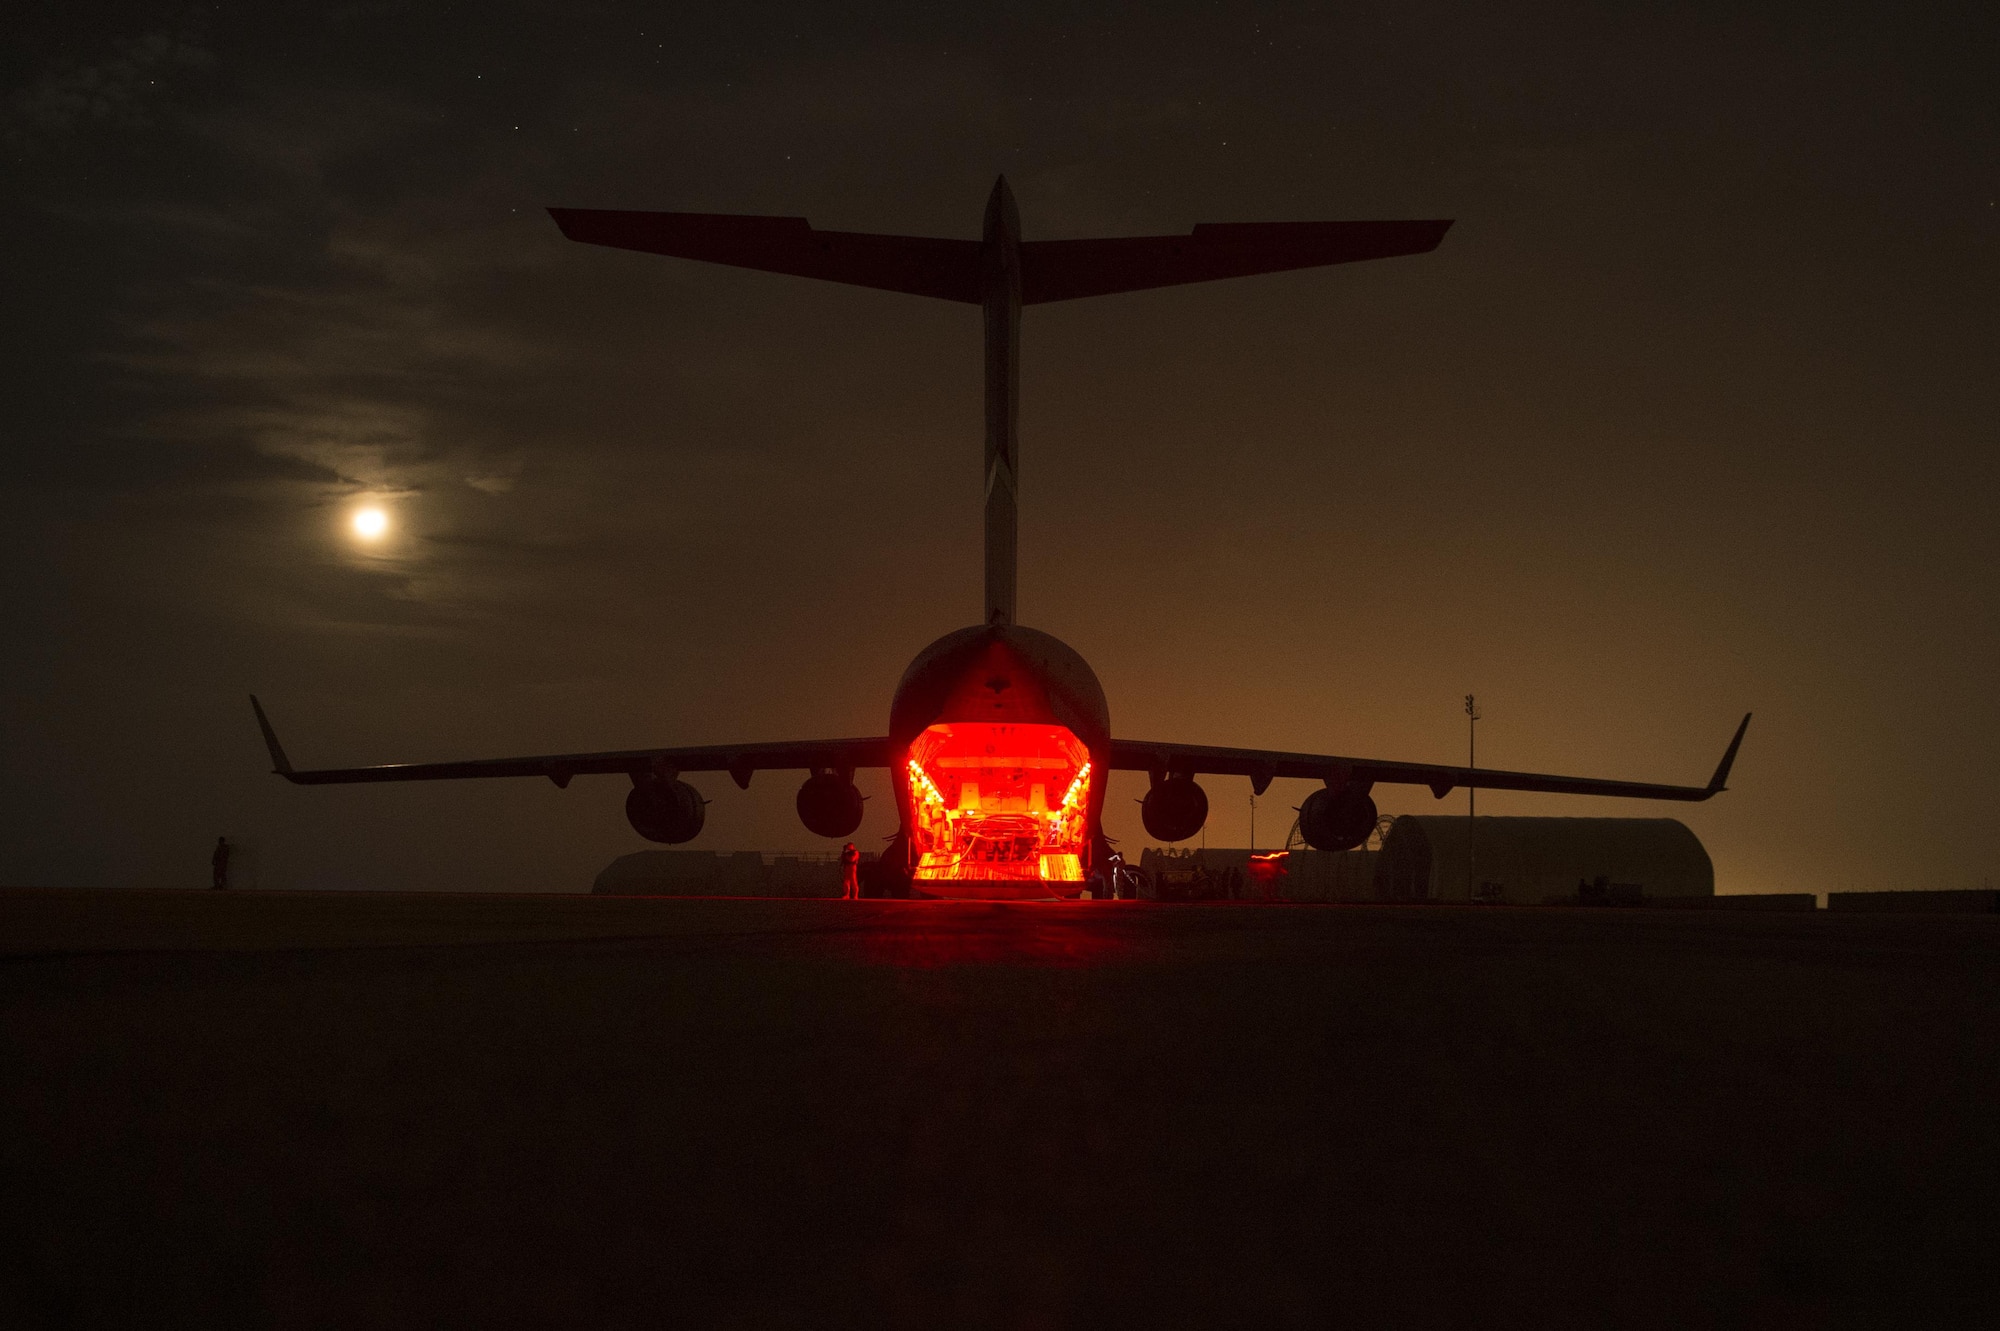 U.S. Air Force Airmen deliver fuel to coalition bases in Iraq in support of Operation Inherent Resolve, Dec. 16, 2015. OIR is the coalition intervention against the Islamic State of Iraq and the Levant. (U.S. Air Force photo by Tech. Sgt. Nathan Lipscomb)